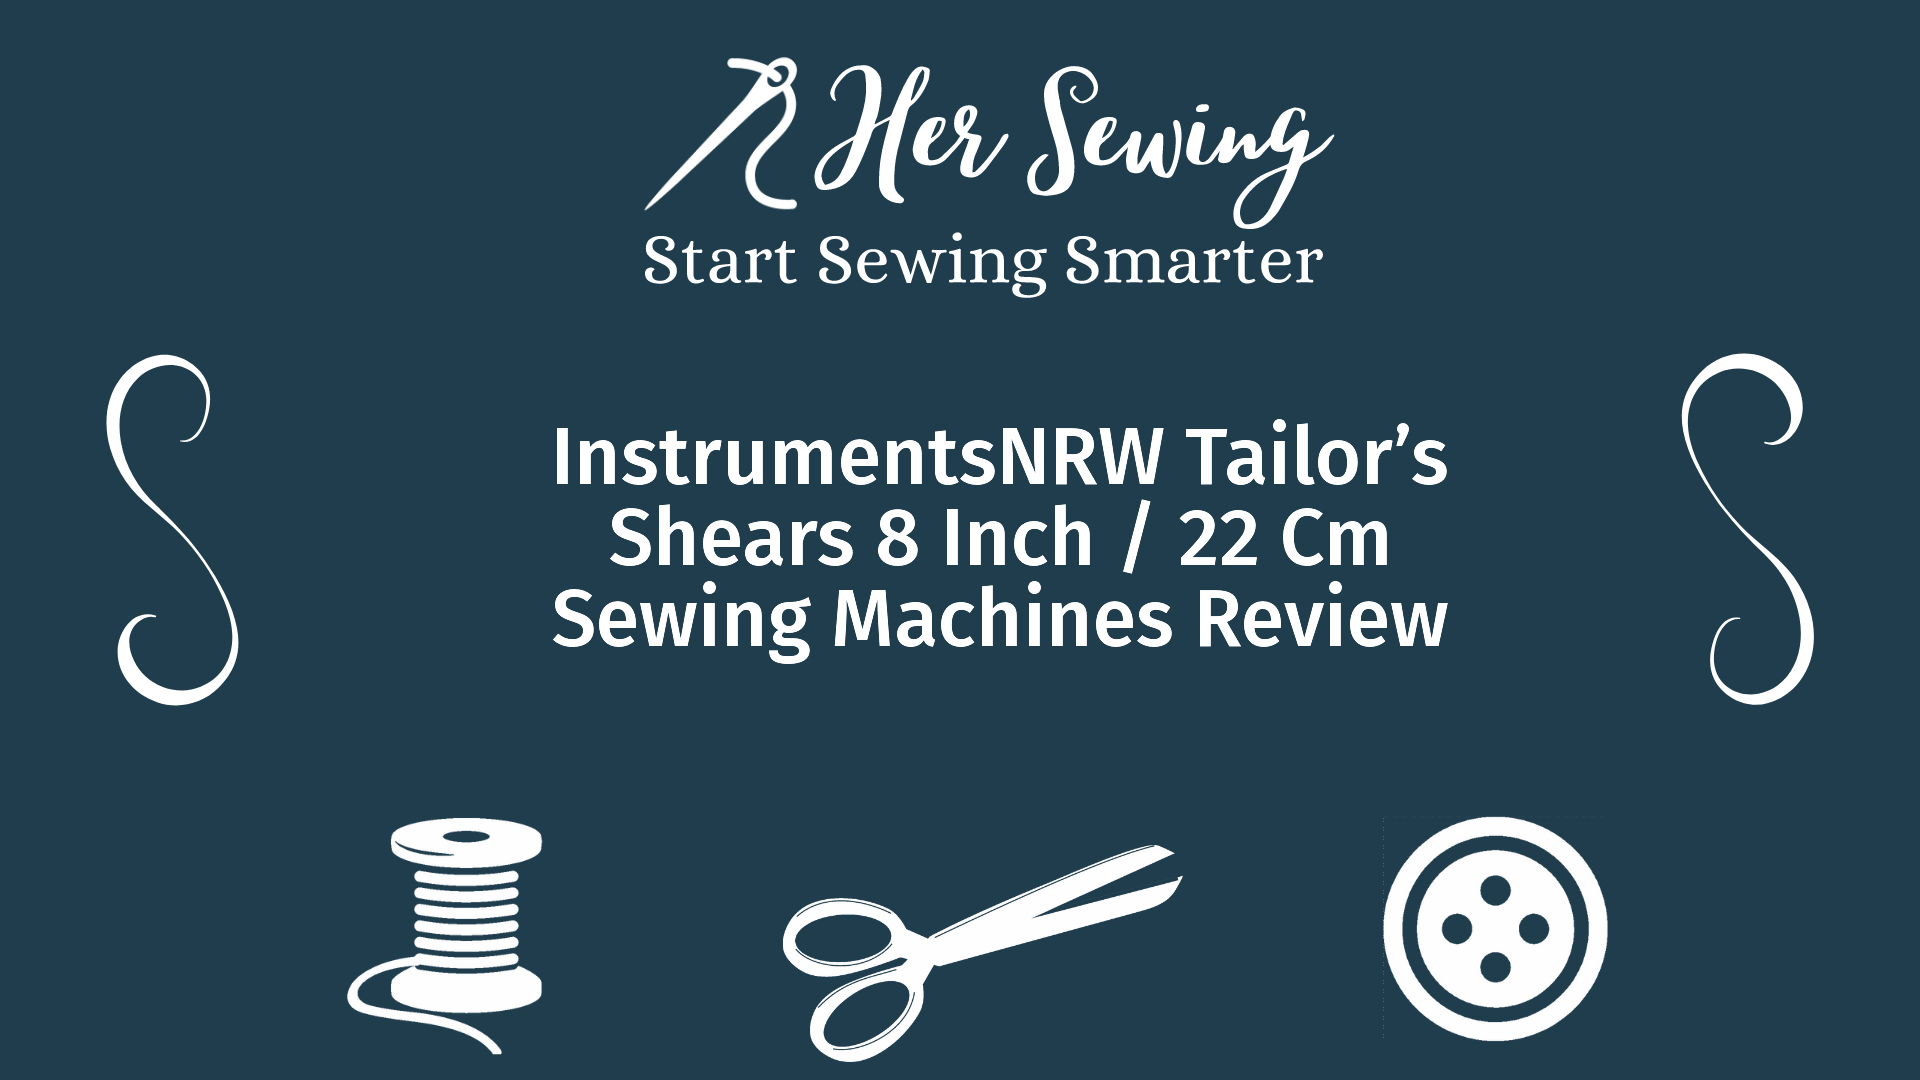 InstrumentsNRW Tailor’s Shears 8 Inch / 22 Cm Sewing Machines Review